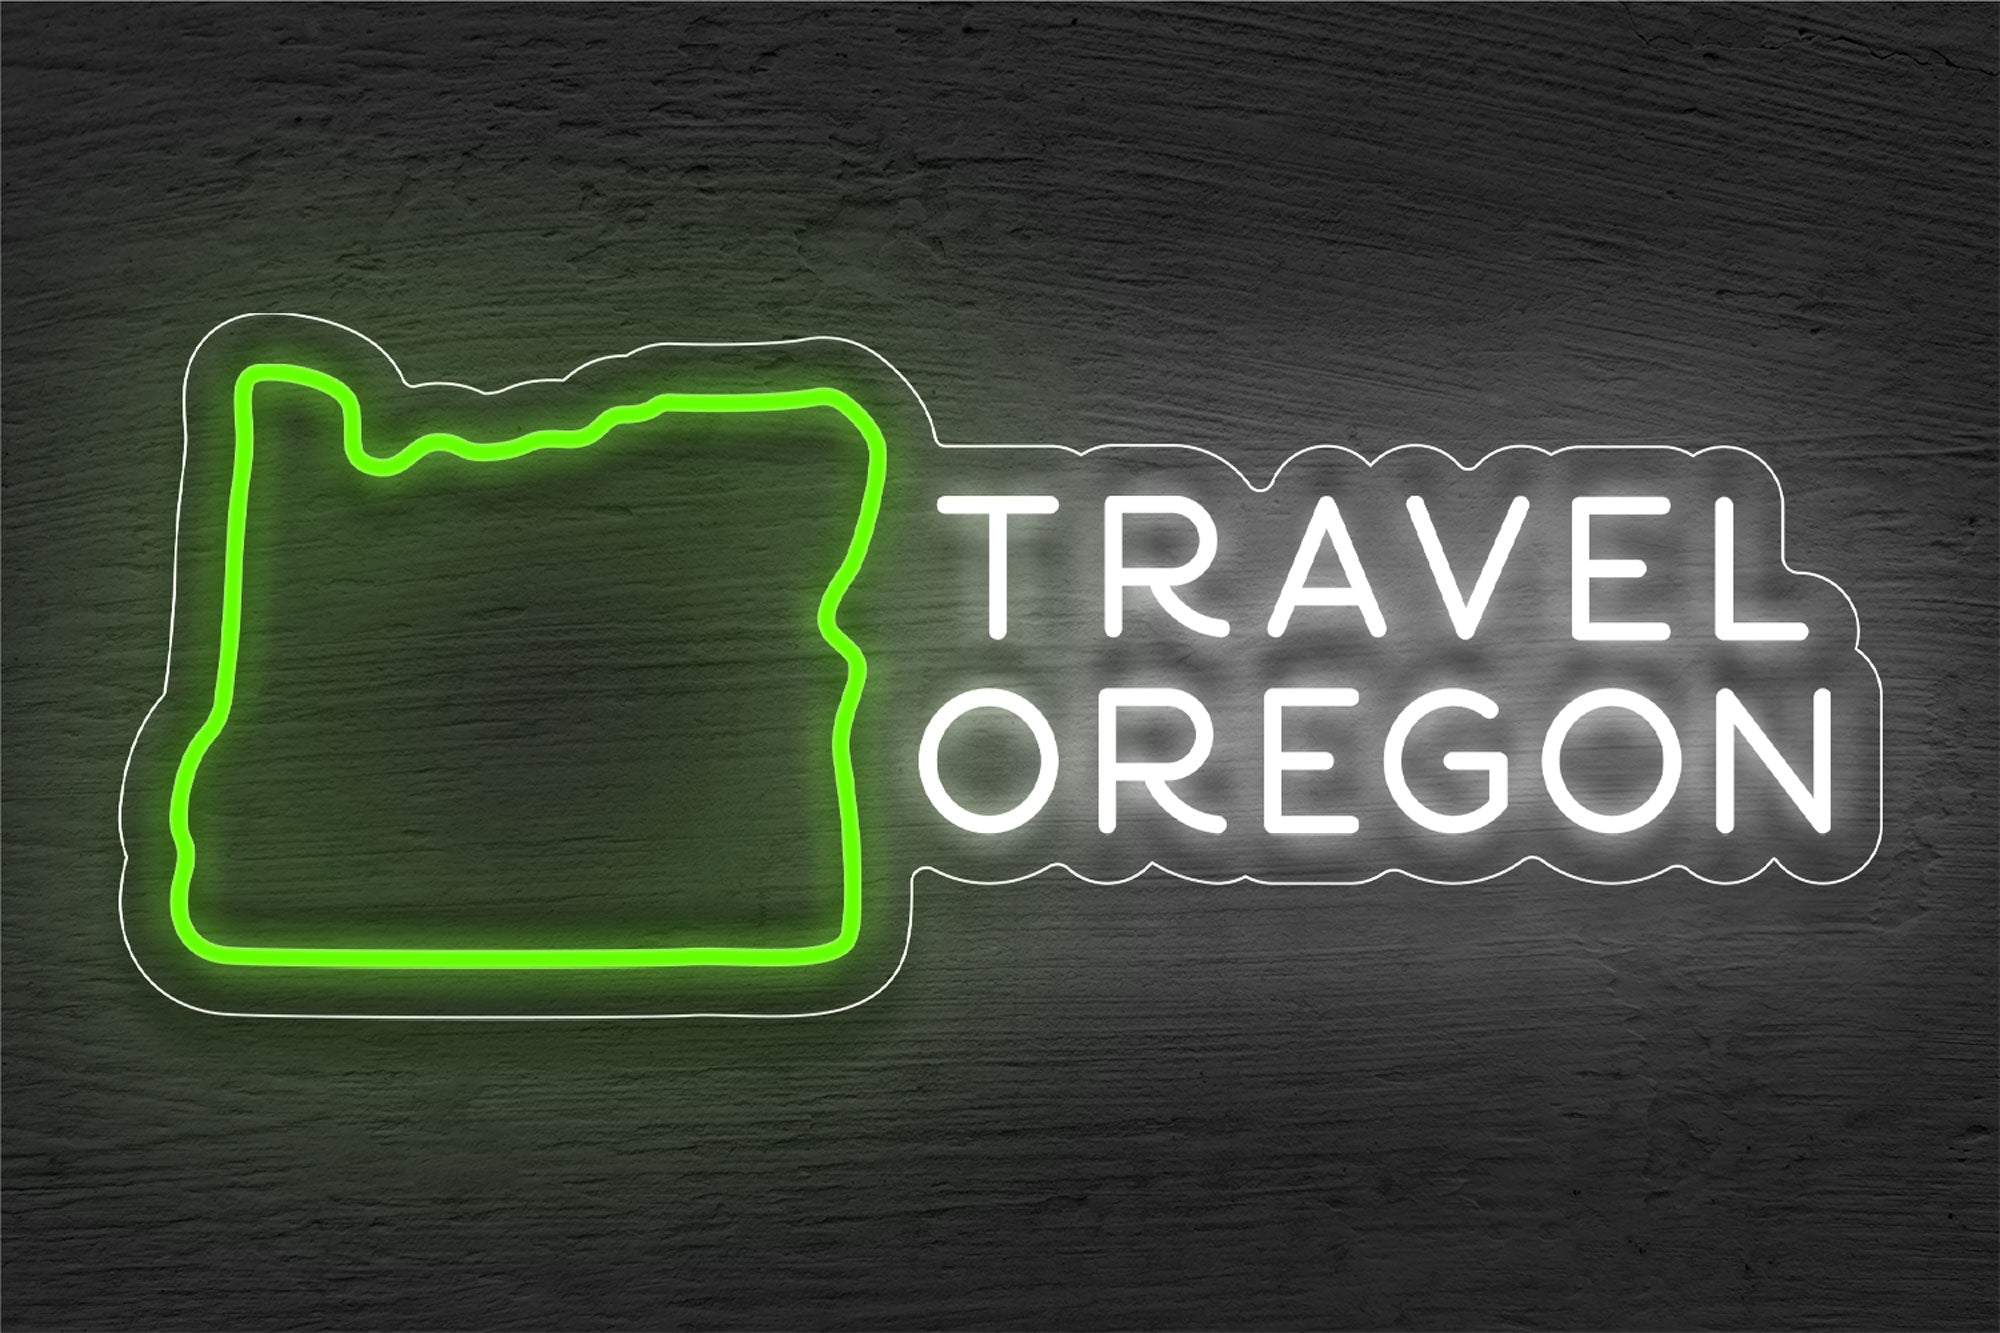 Map and "Travel Oregon" LED Neon Sign